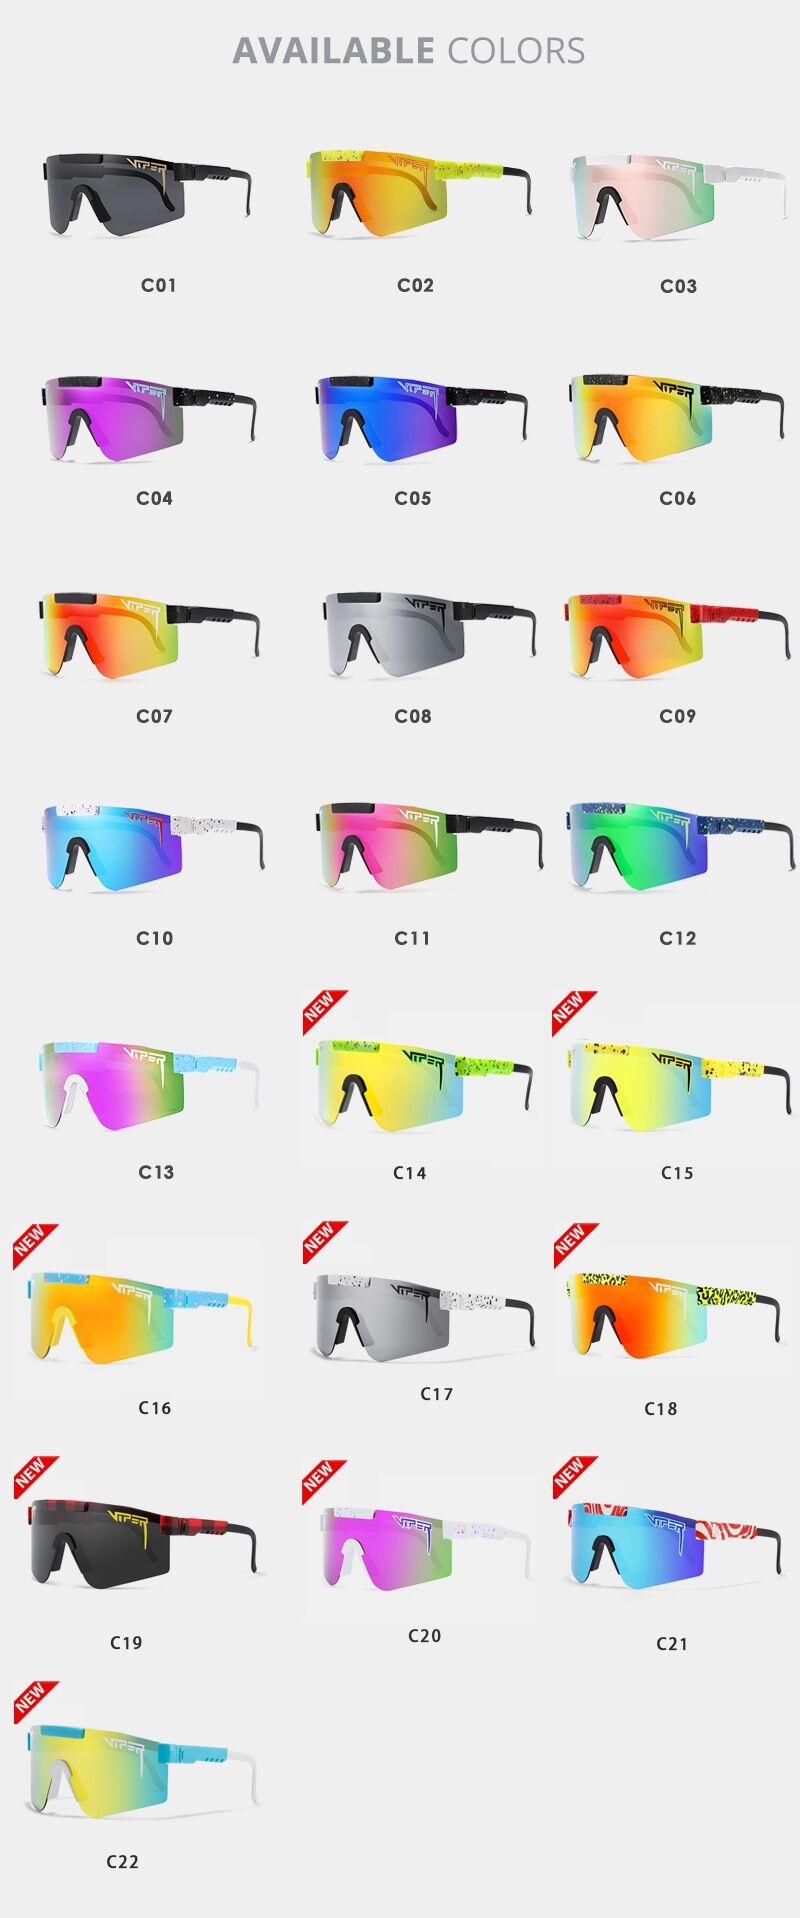 /dlxpv-pit-viper-windproof-cycling-sport-polarized-sunglass-product/